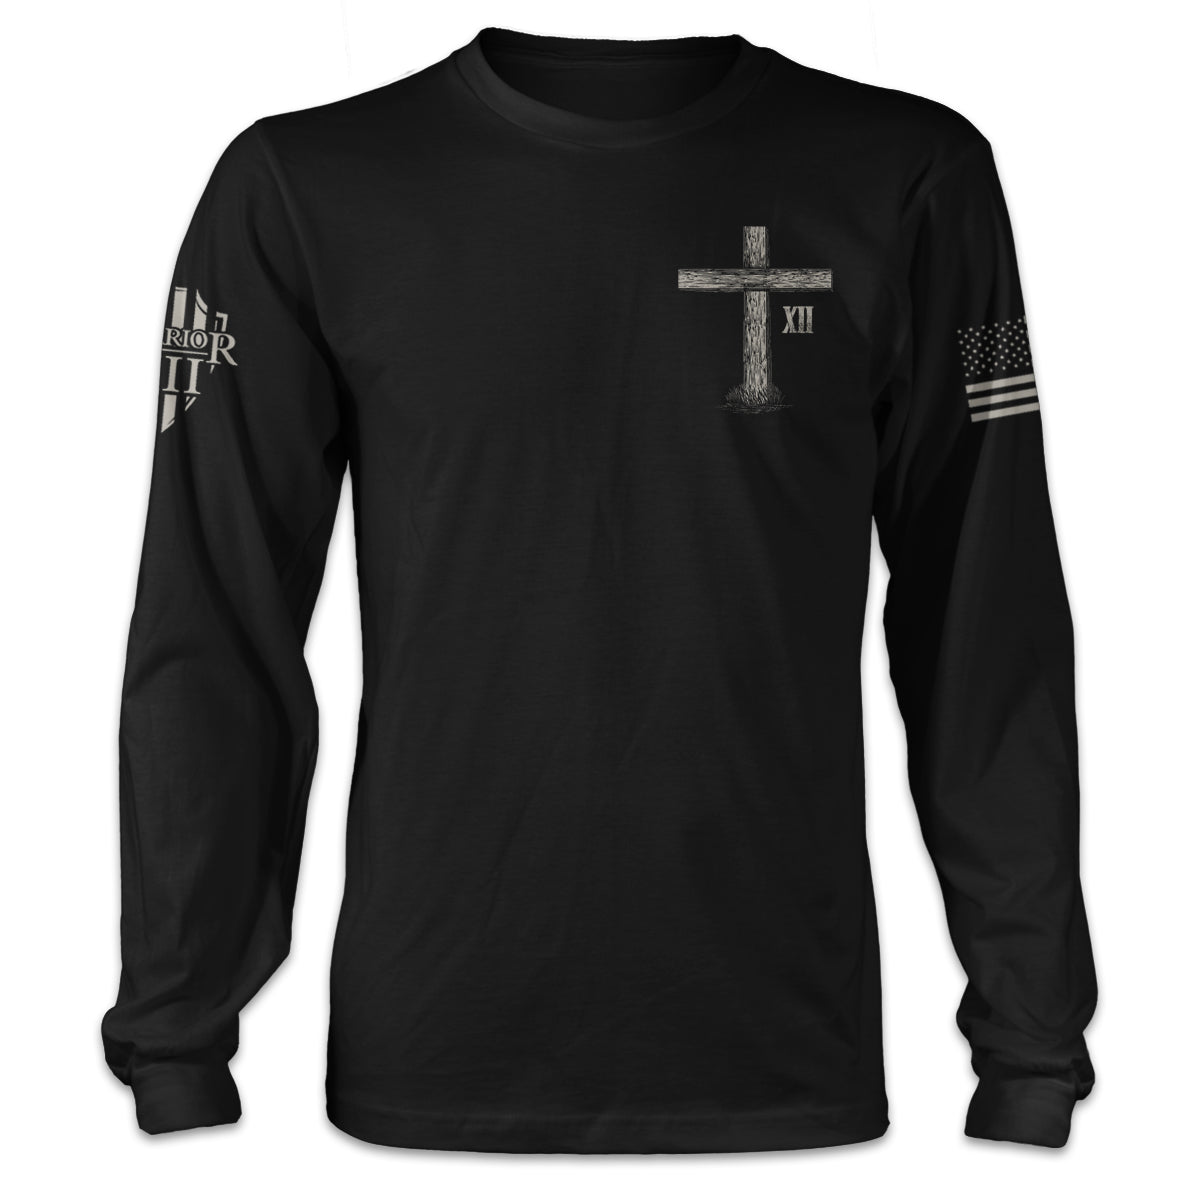 A black long sleeve shirt with a cross printed on the front.